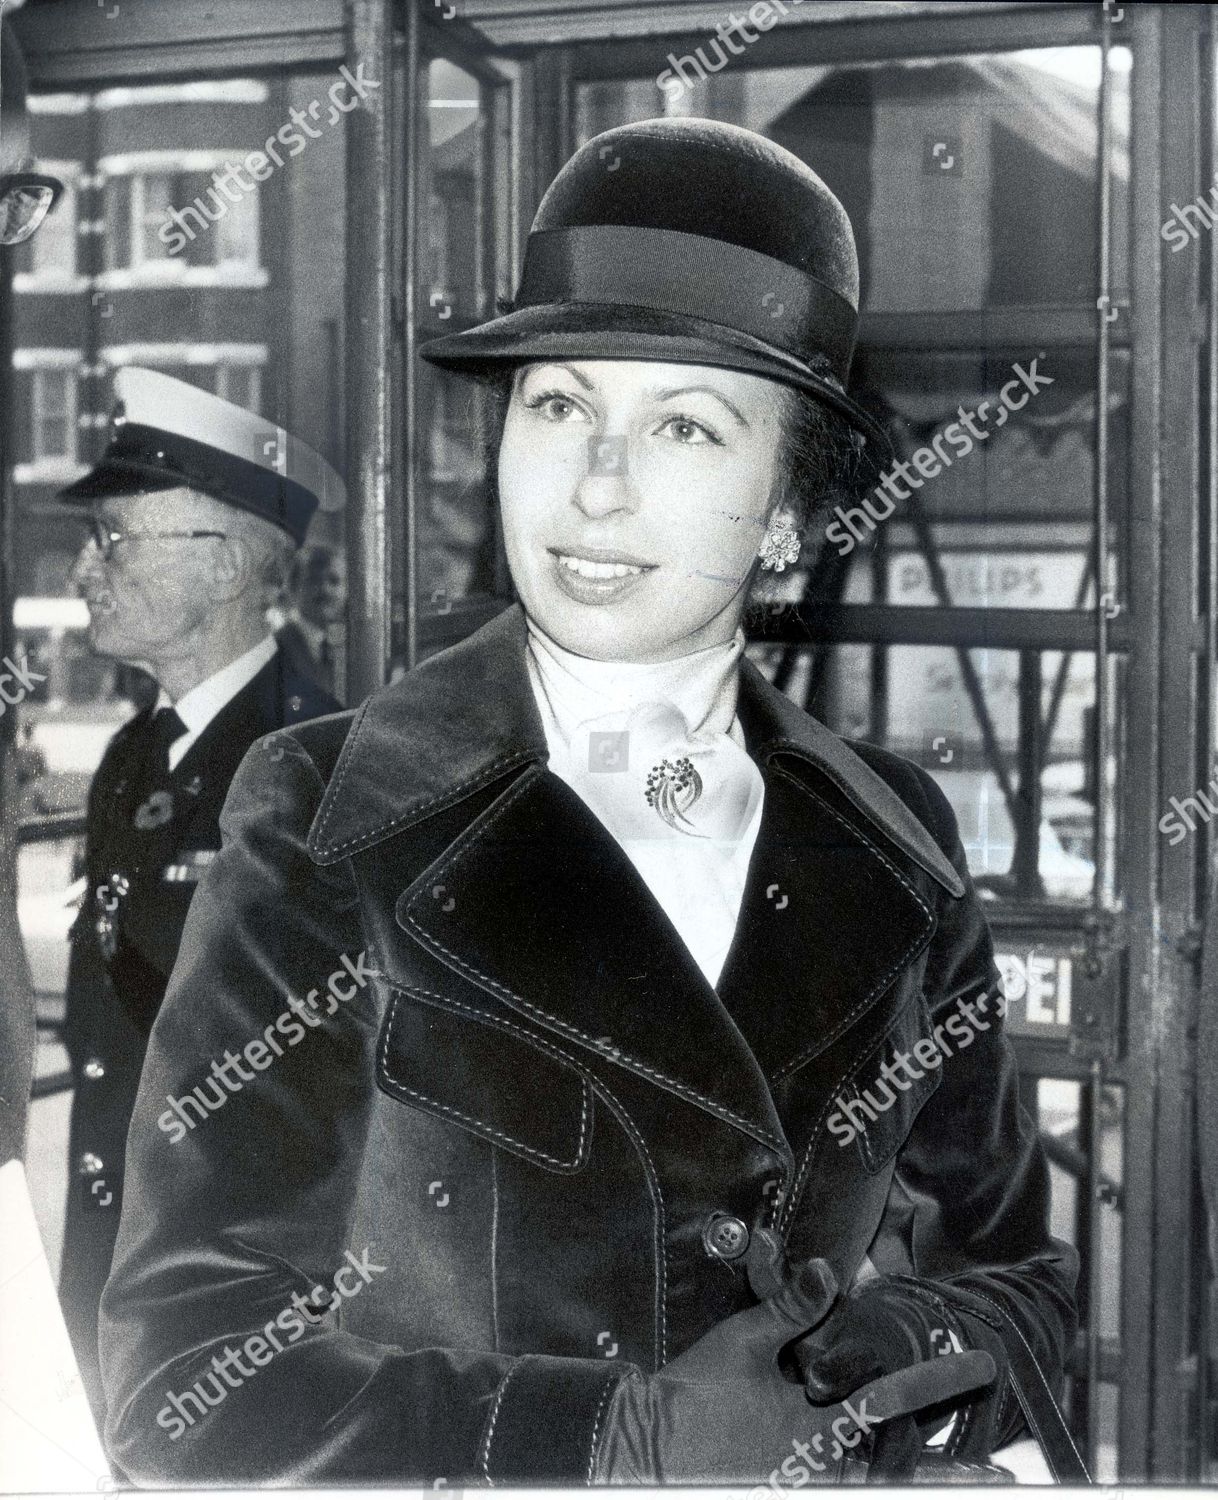 princess-anne-now-princess-royal-1979-at-earls-court-princess-anne-amazed-visitors-at-the-caravan-camping-holiday-show-by-admitting-that-she-often-stays-in-mobile-homes-shutterstock-editorial-890981a.jpg